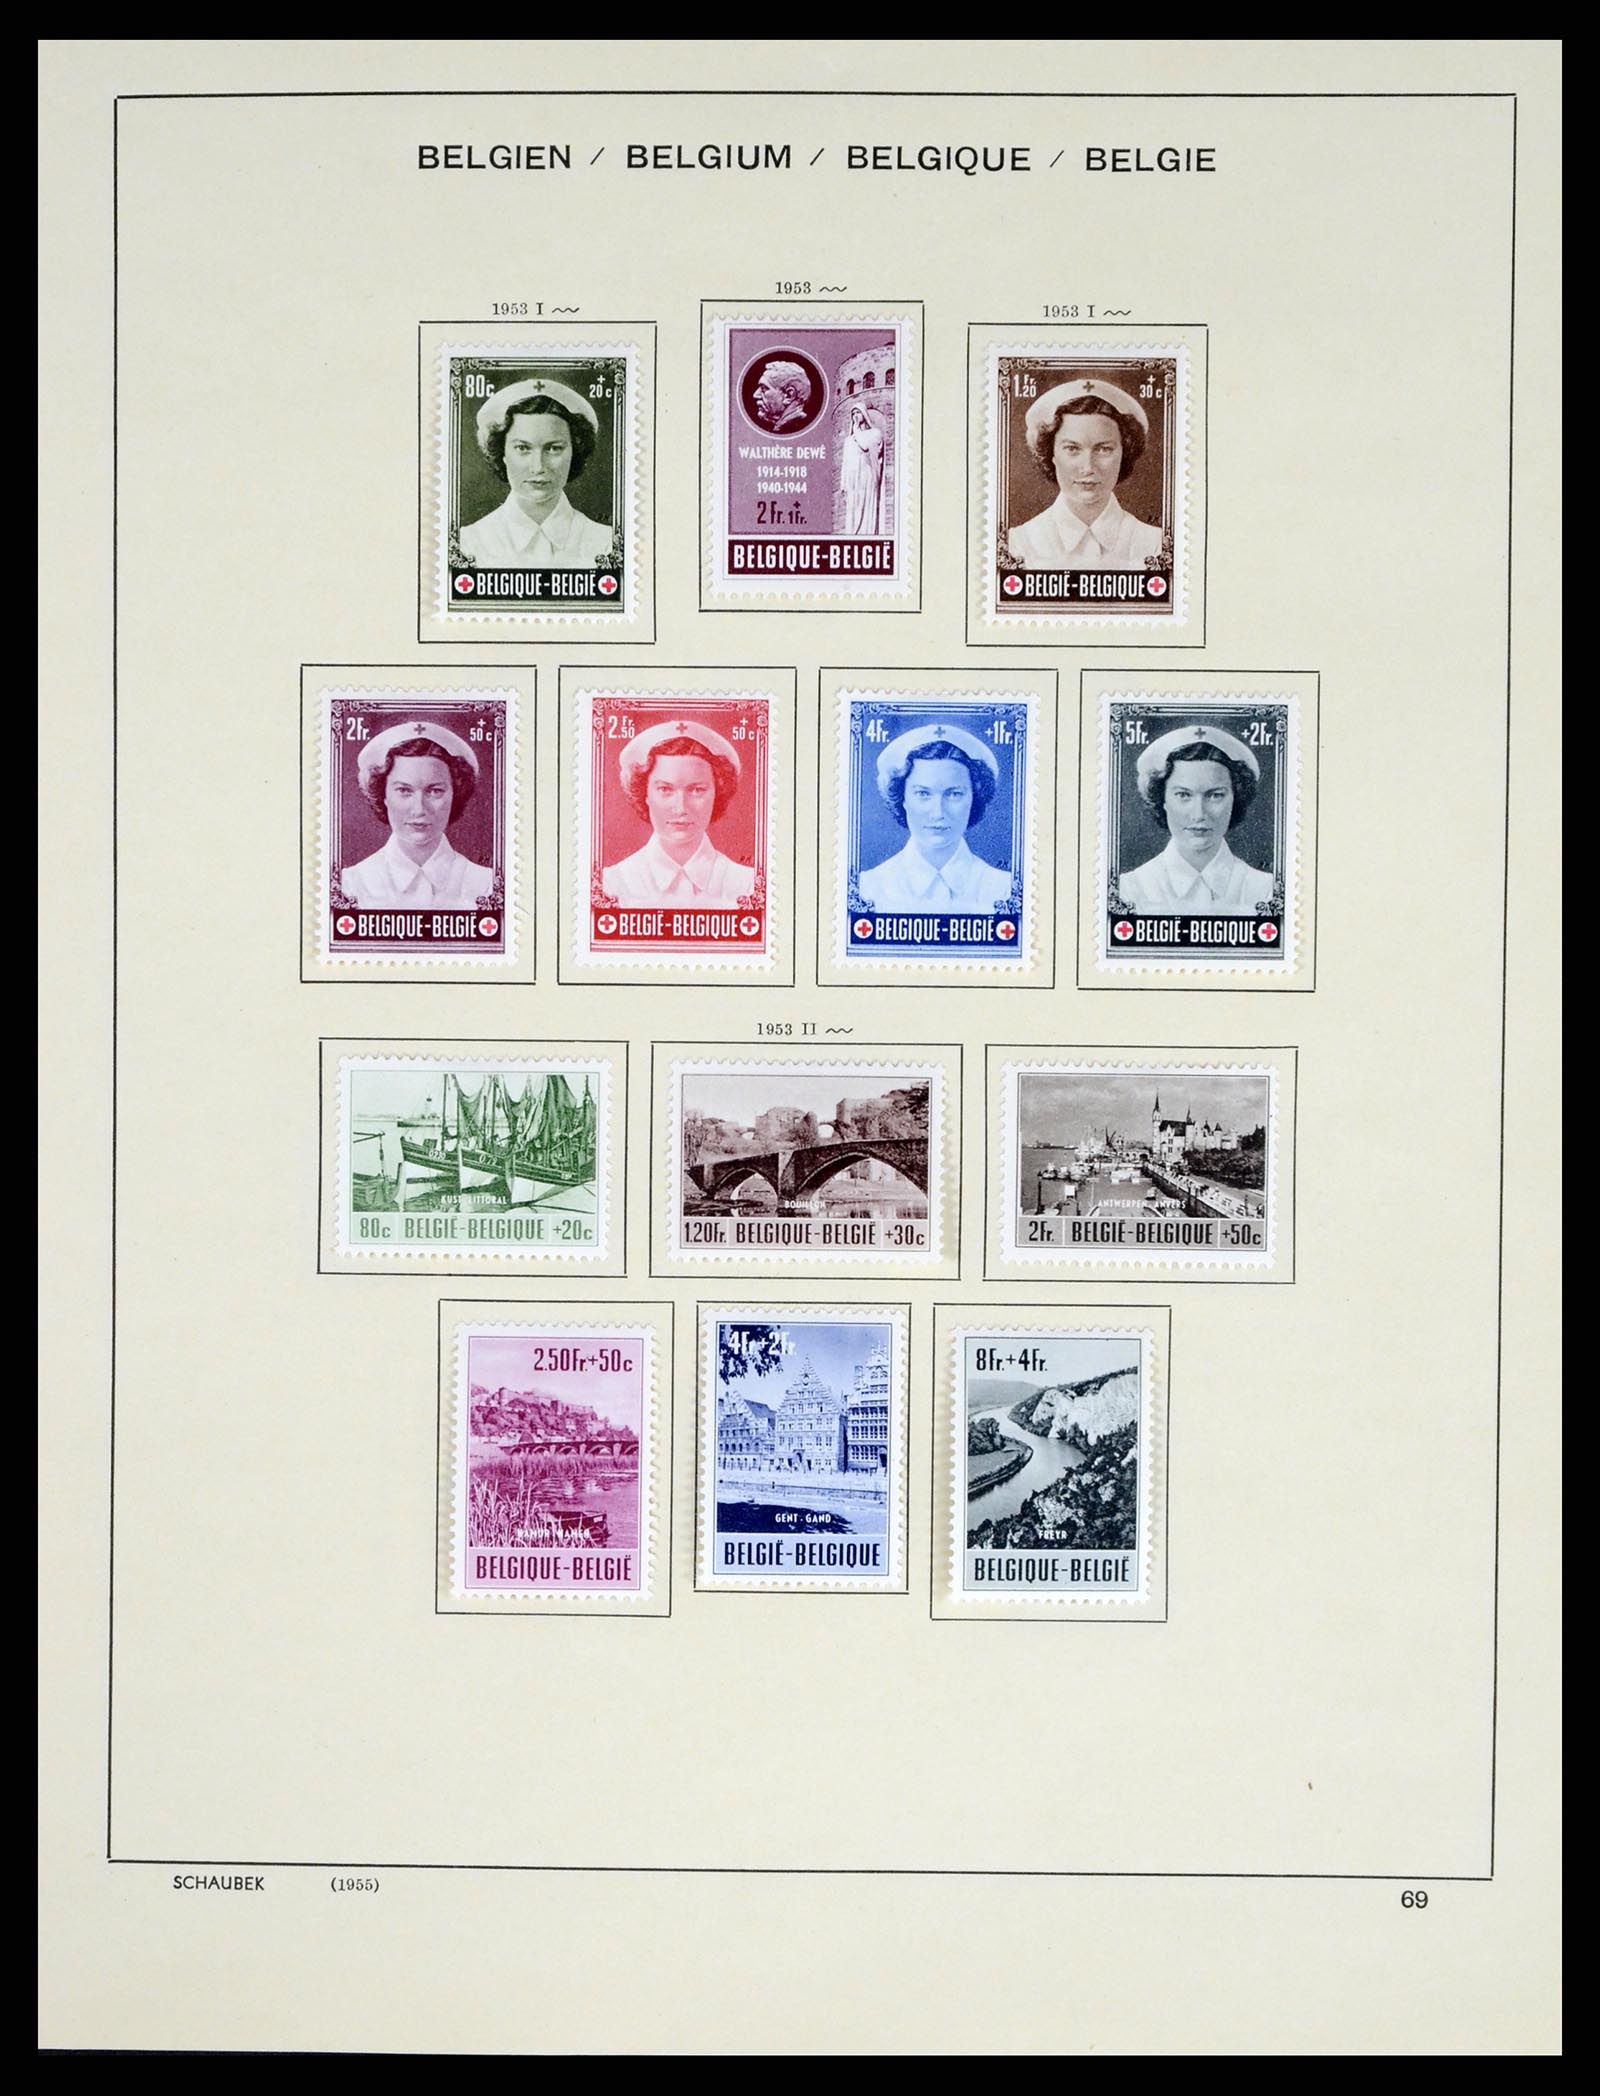 37595 082 - Stamp collection 37595 Super collection Belgium 1849-2015!